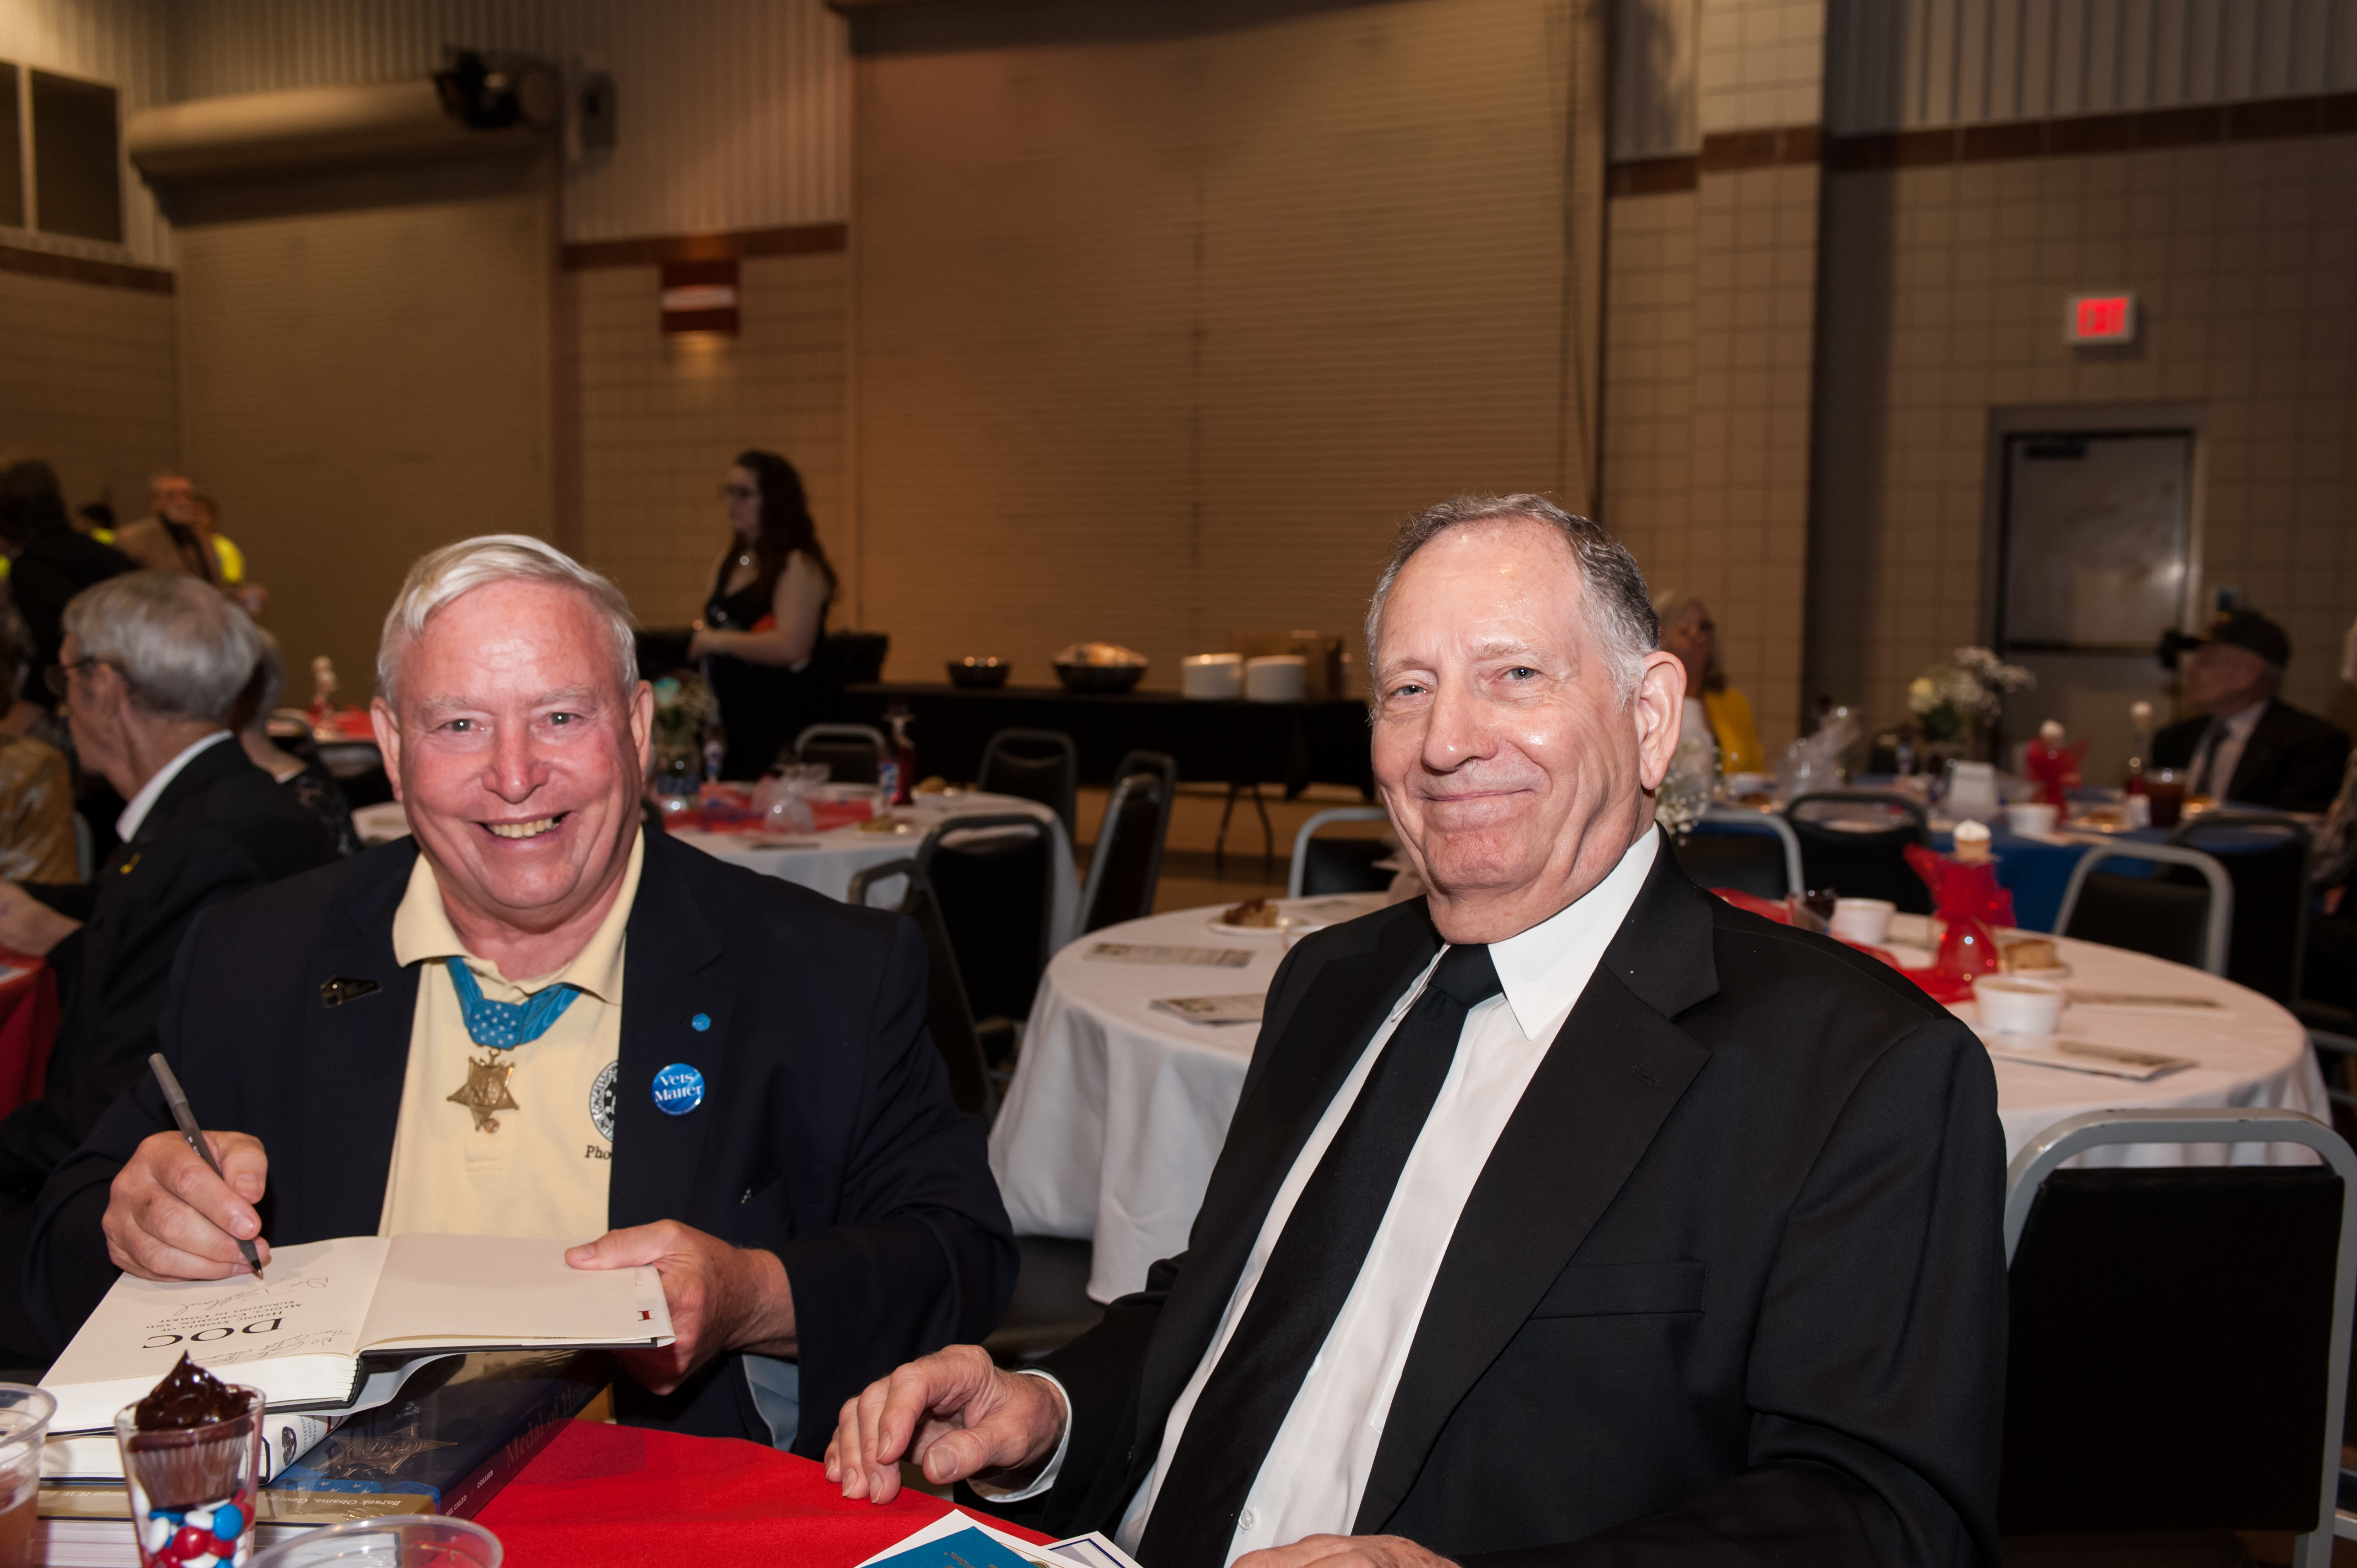 Shaie Williams for AGN Media. Charles Wright and Byerl Bates at the Armed Forces Day Banquet  in Amarillo, TX Held at the Amarillo Civic Center on May 21, 2016.